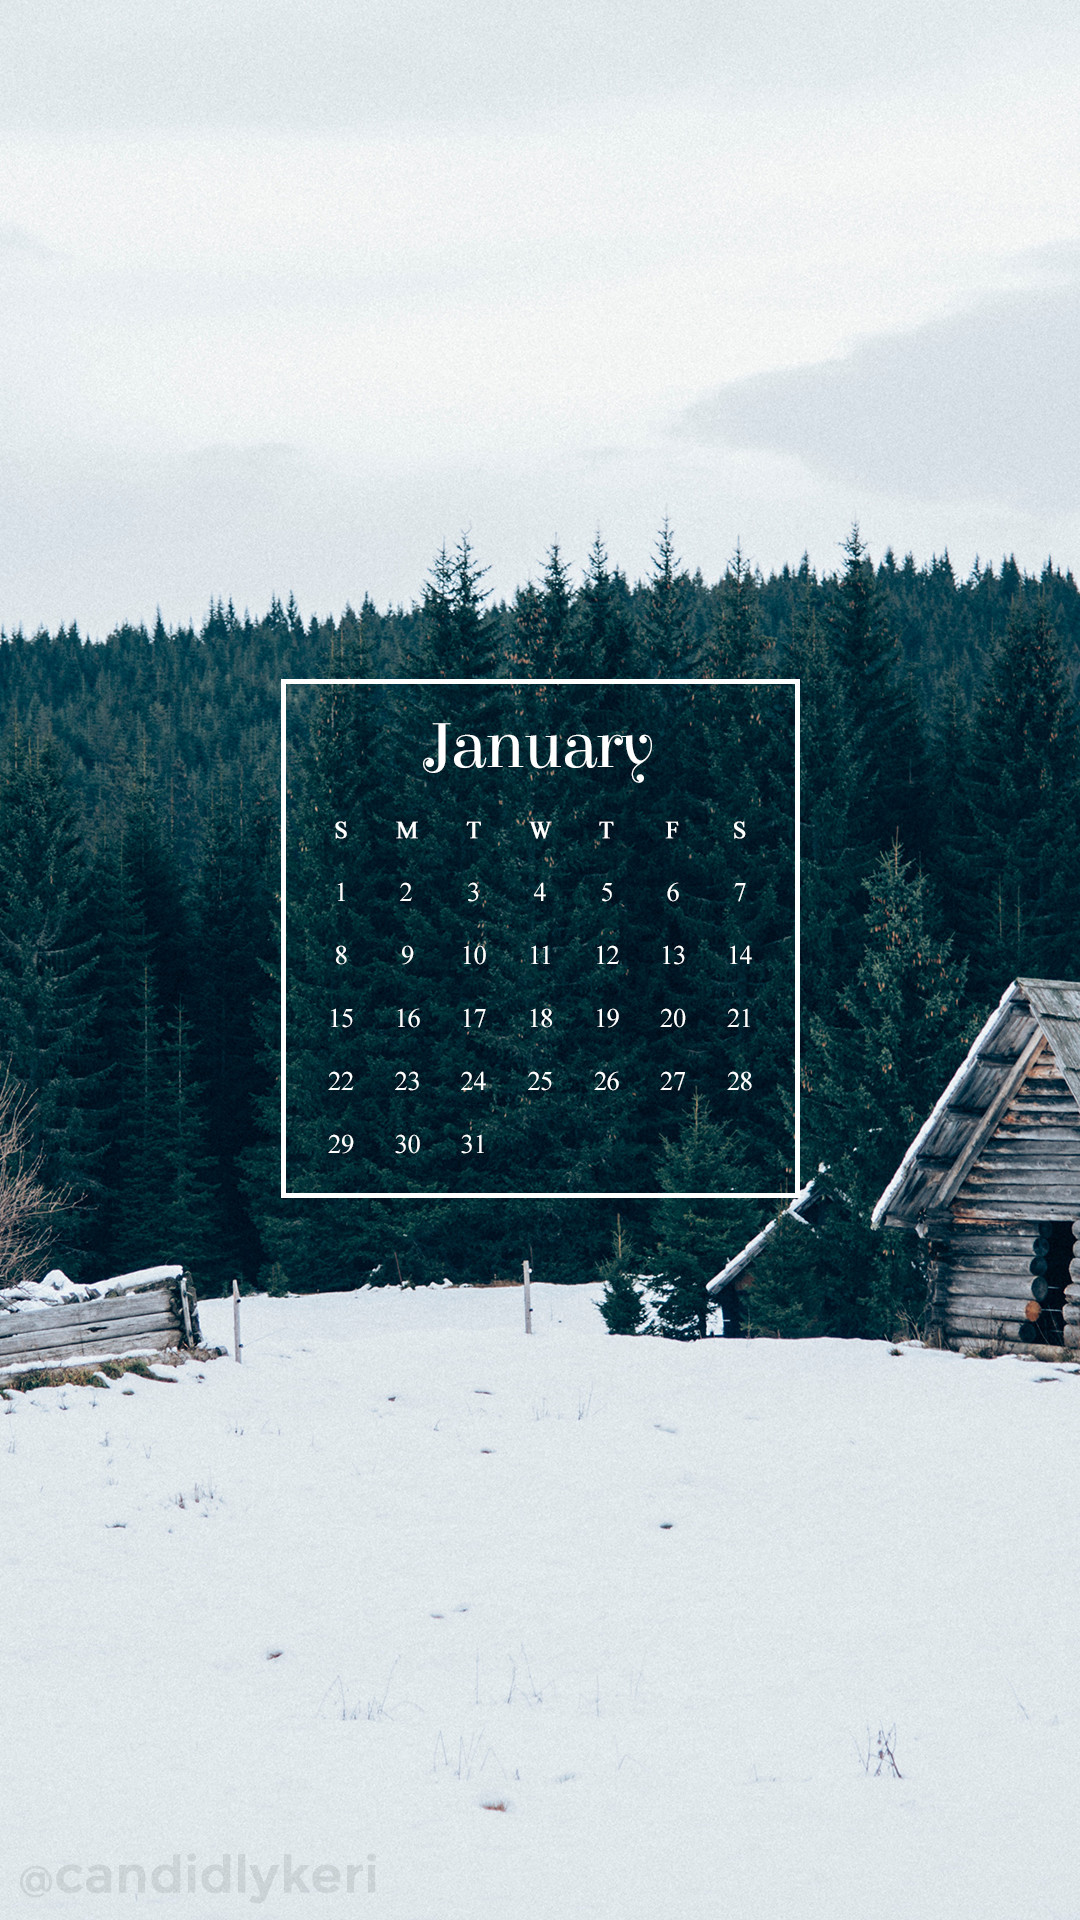 1080x1920 Winter cabin snow forest background January calendar 2017 wallpaper you can  download for free on the